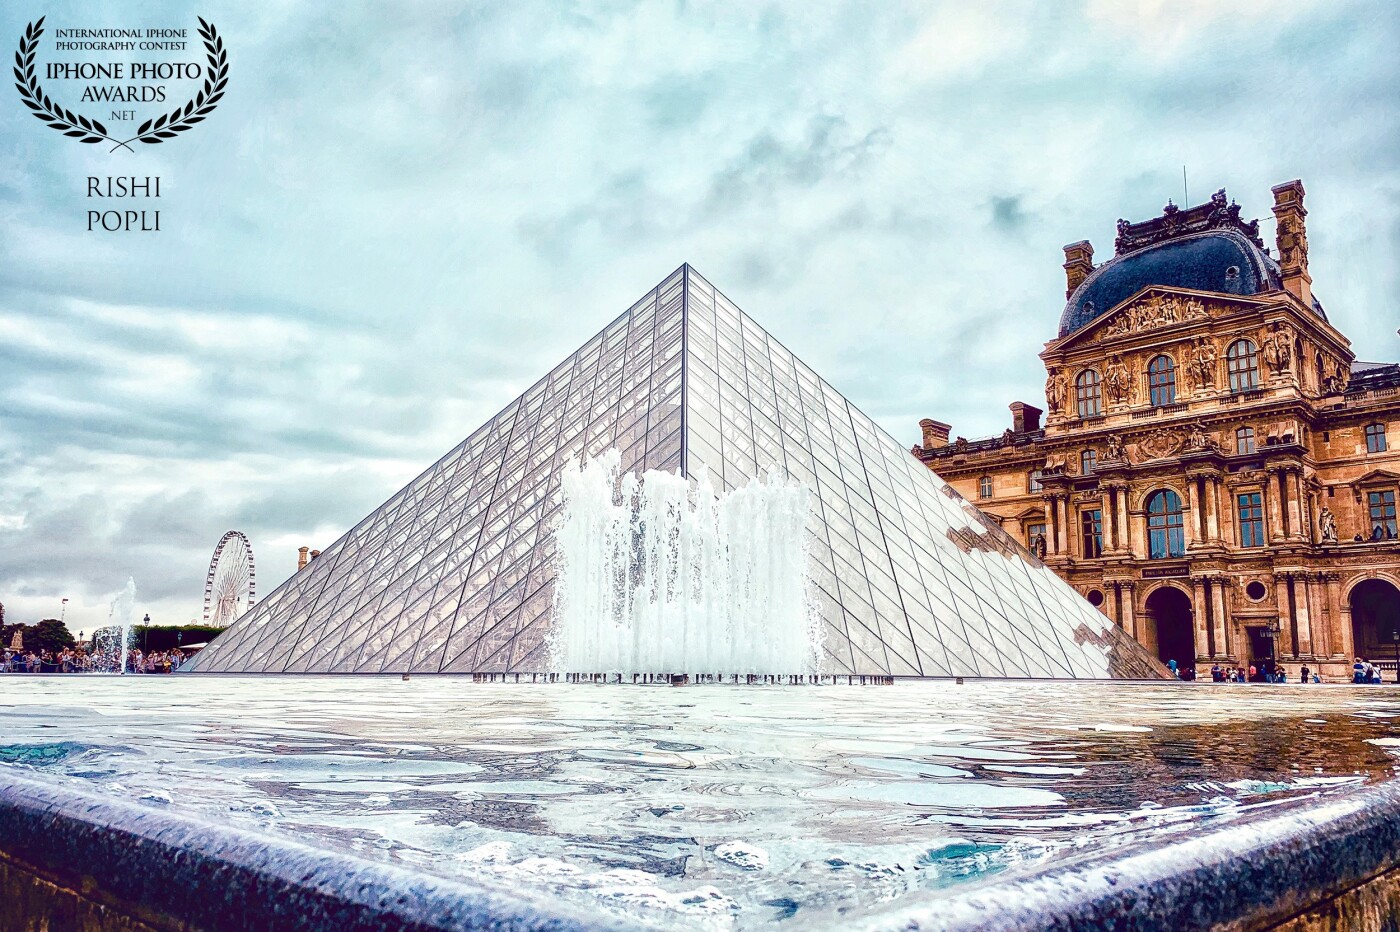 During my recent travel to Paris, I found myself walking the streets on a cloudy day trying to capture some great shots. This photograph was taken in the center of the Louvre Museum, with the backdrop of the famous Pyramid and architectural historical buildings.  